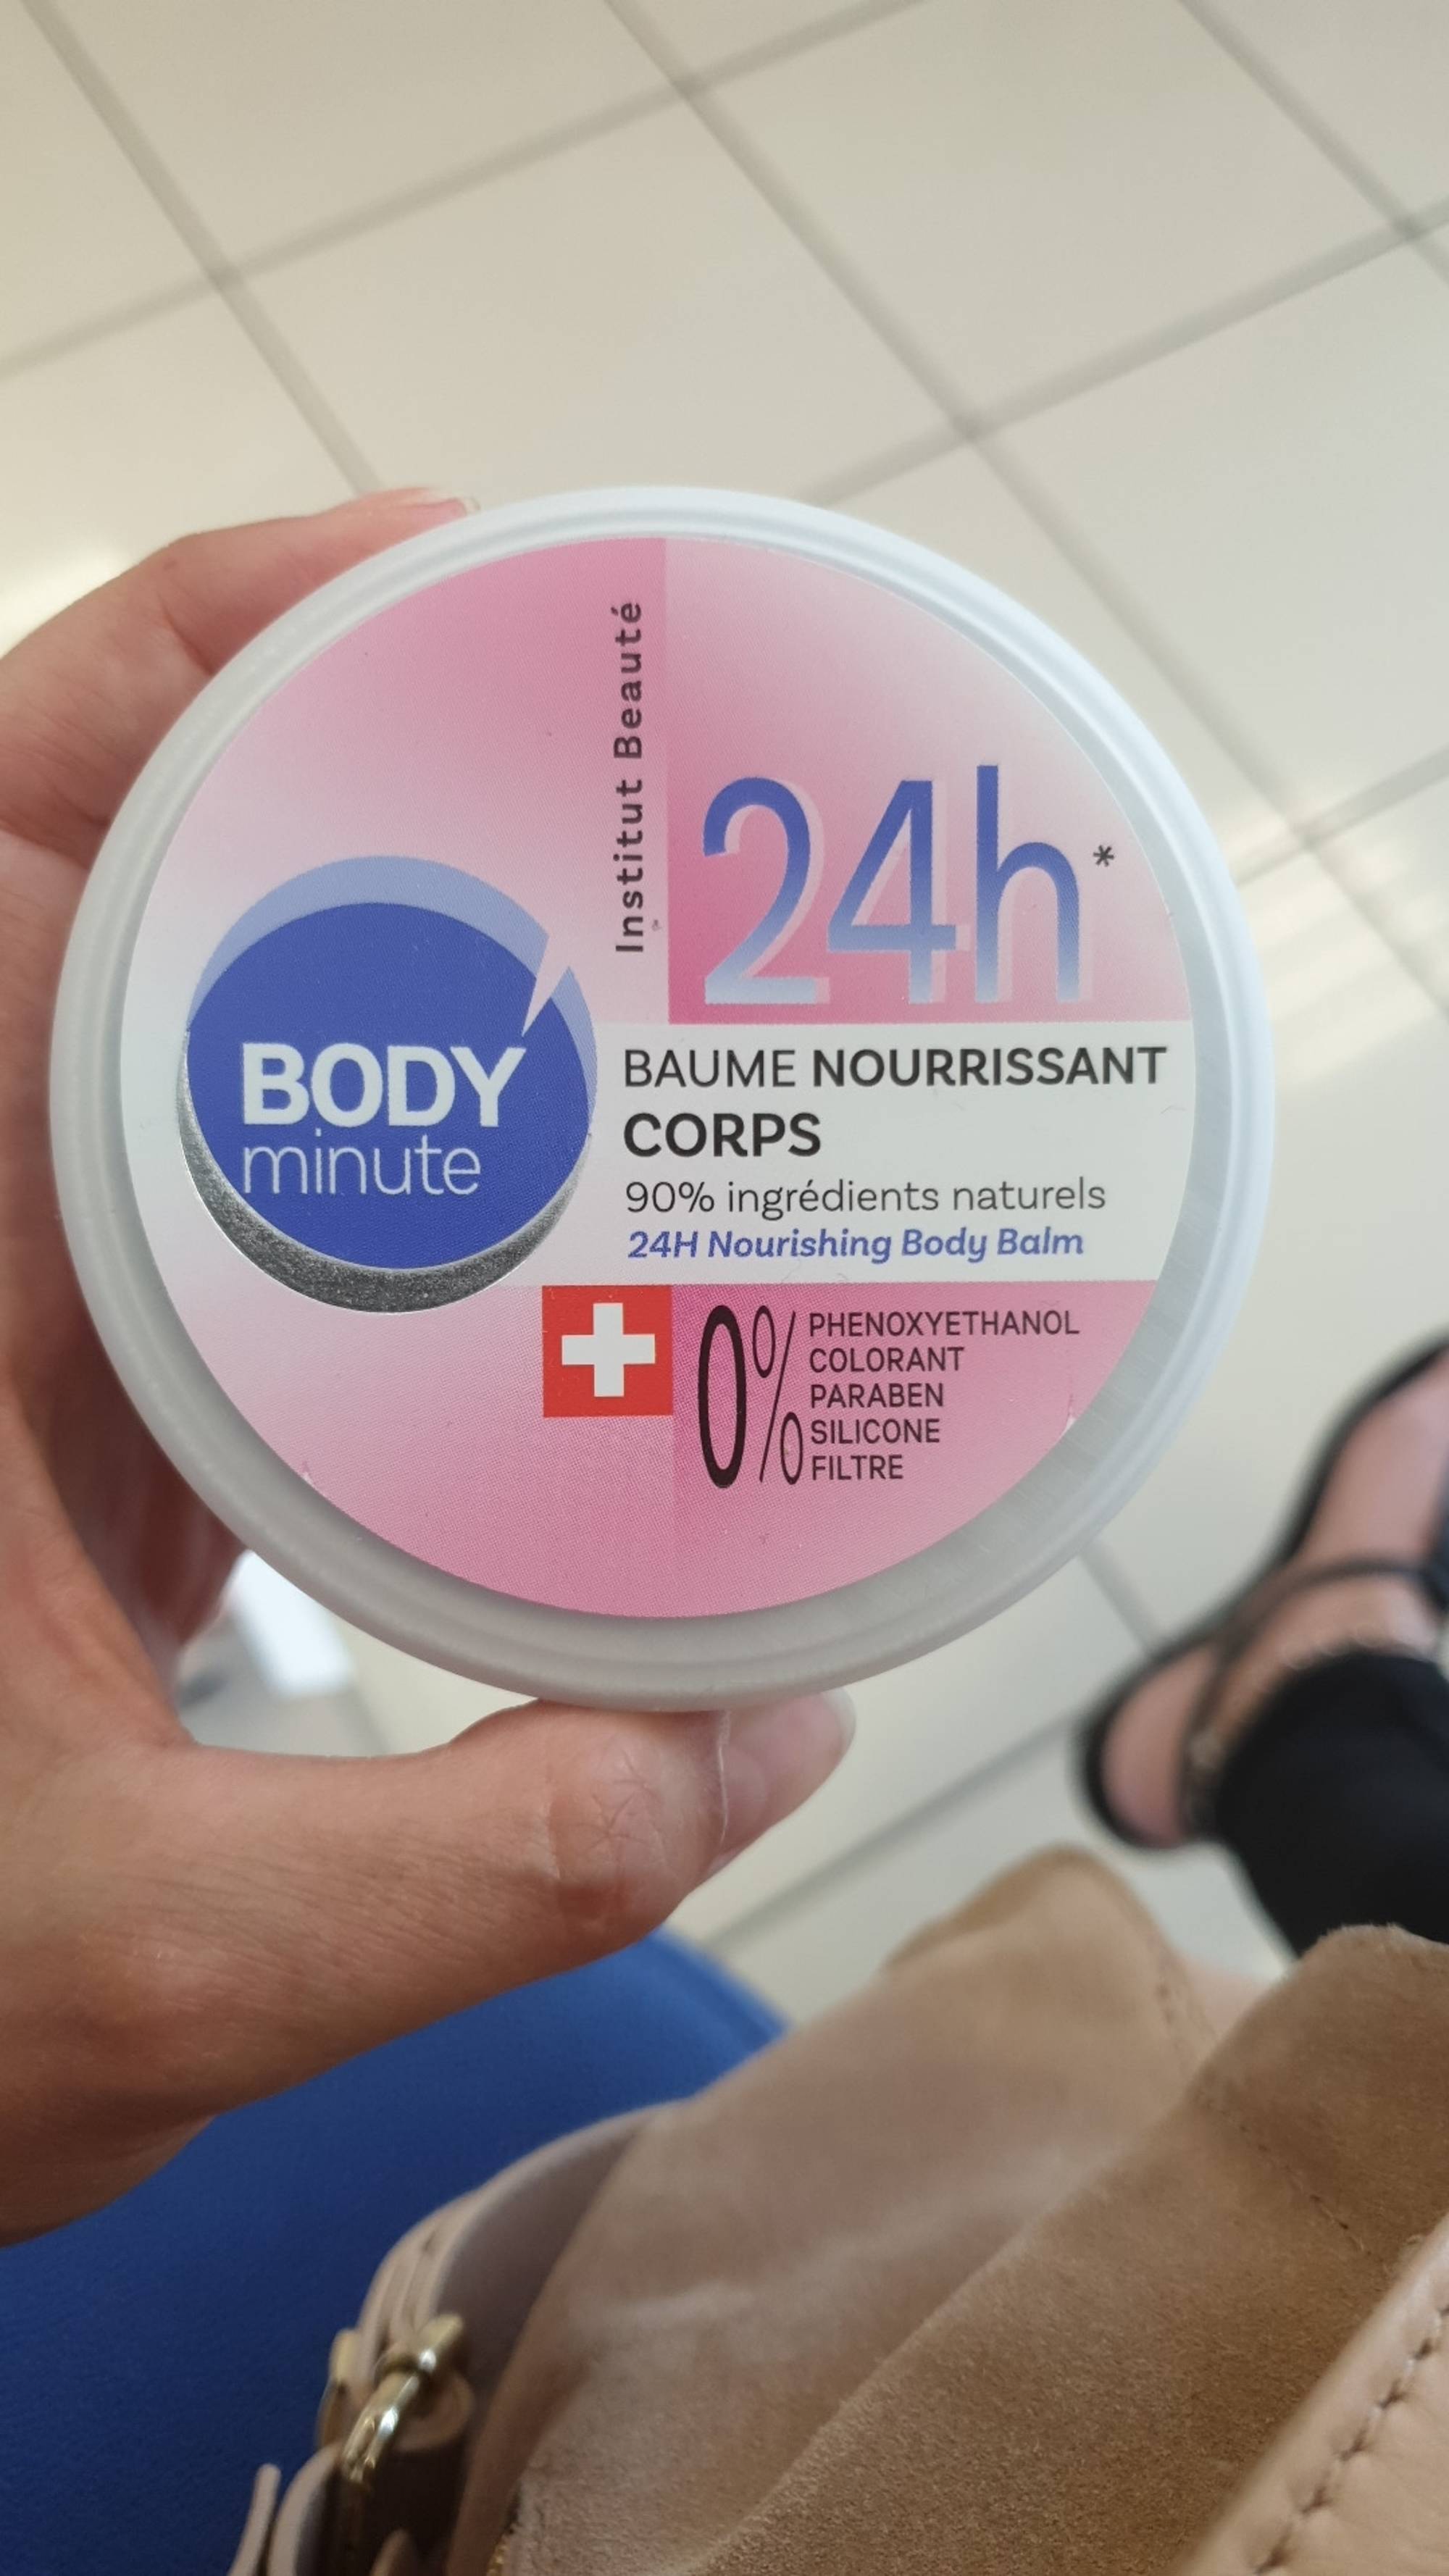 BODY'MINUTE - Baume nourrissant corps 24h